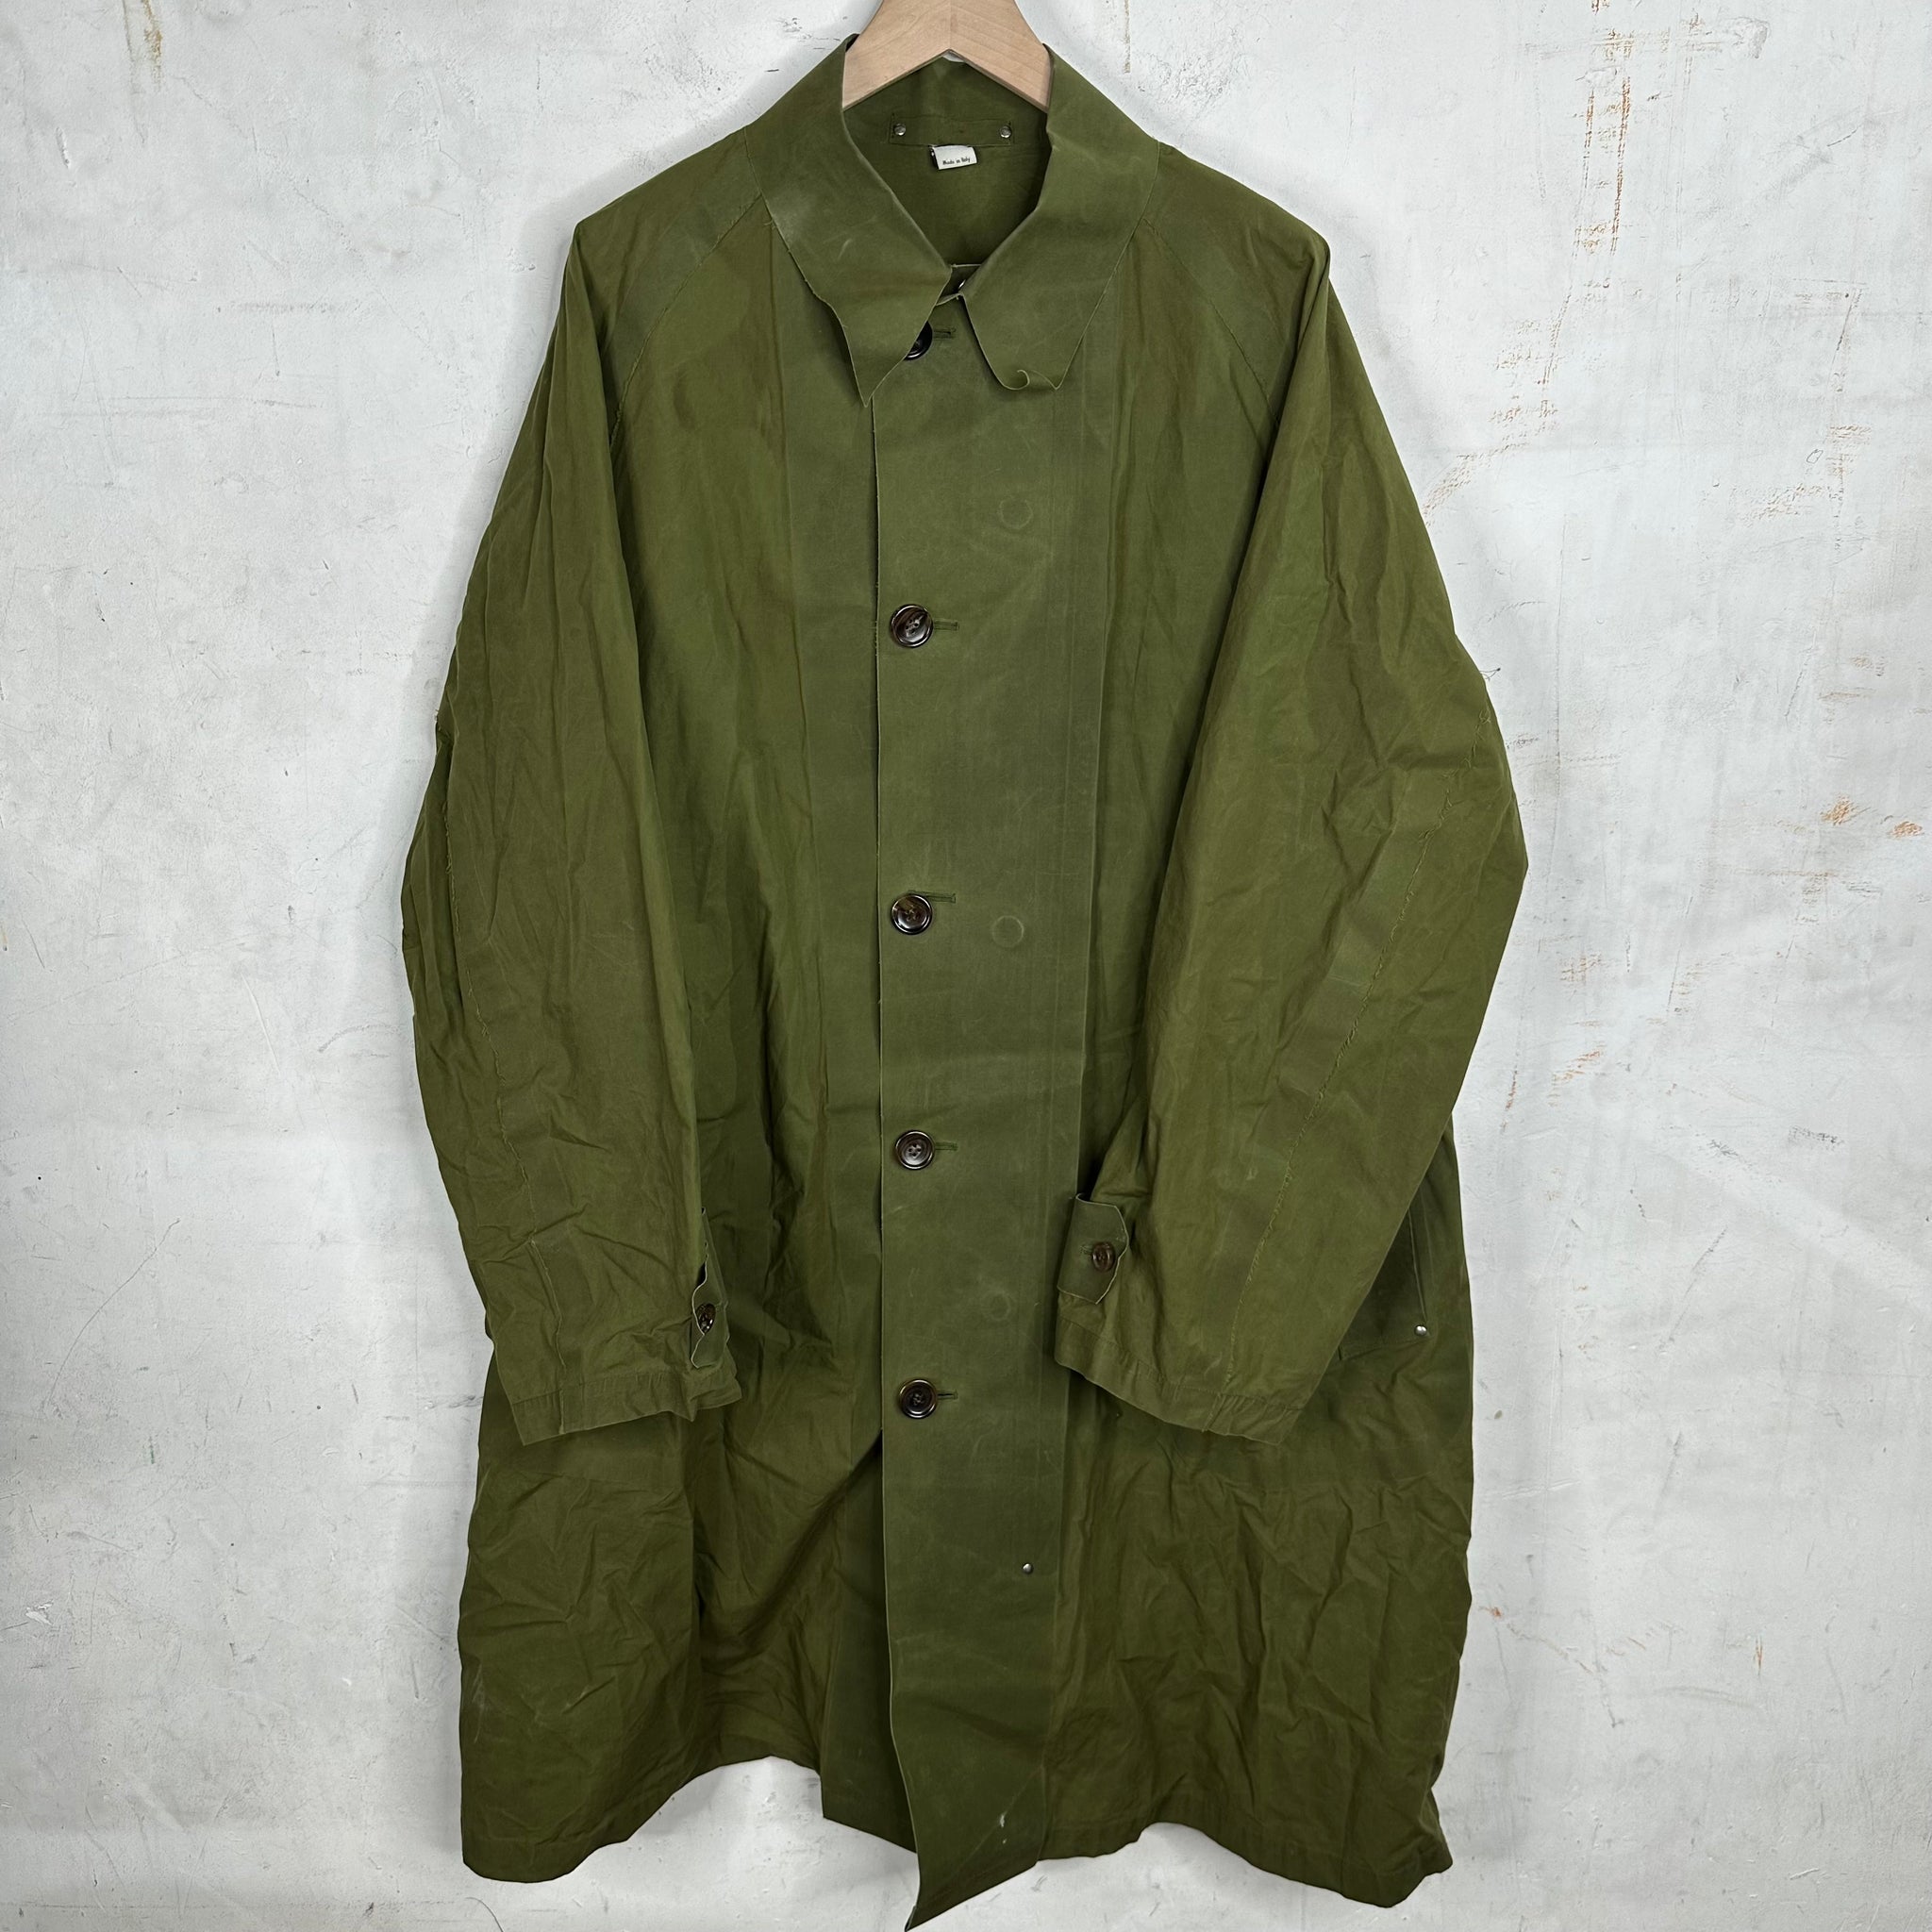 Gucci Taped Seam Trench Coat